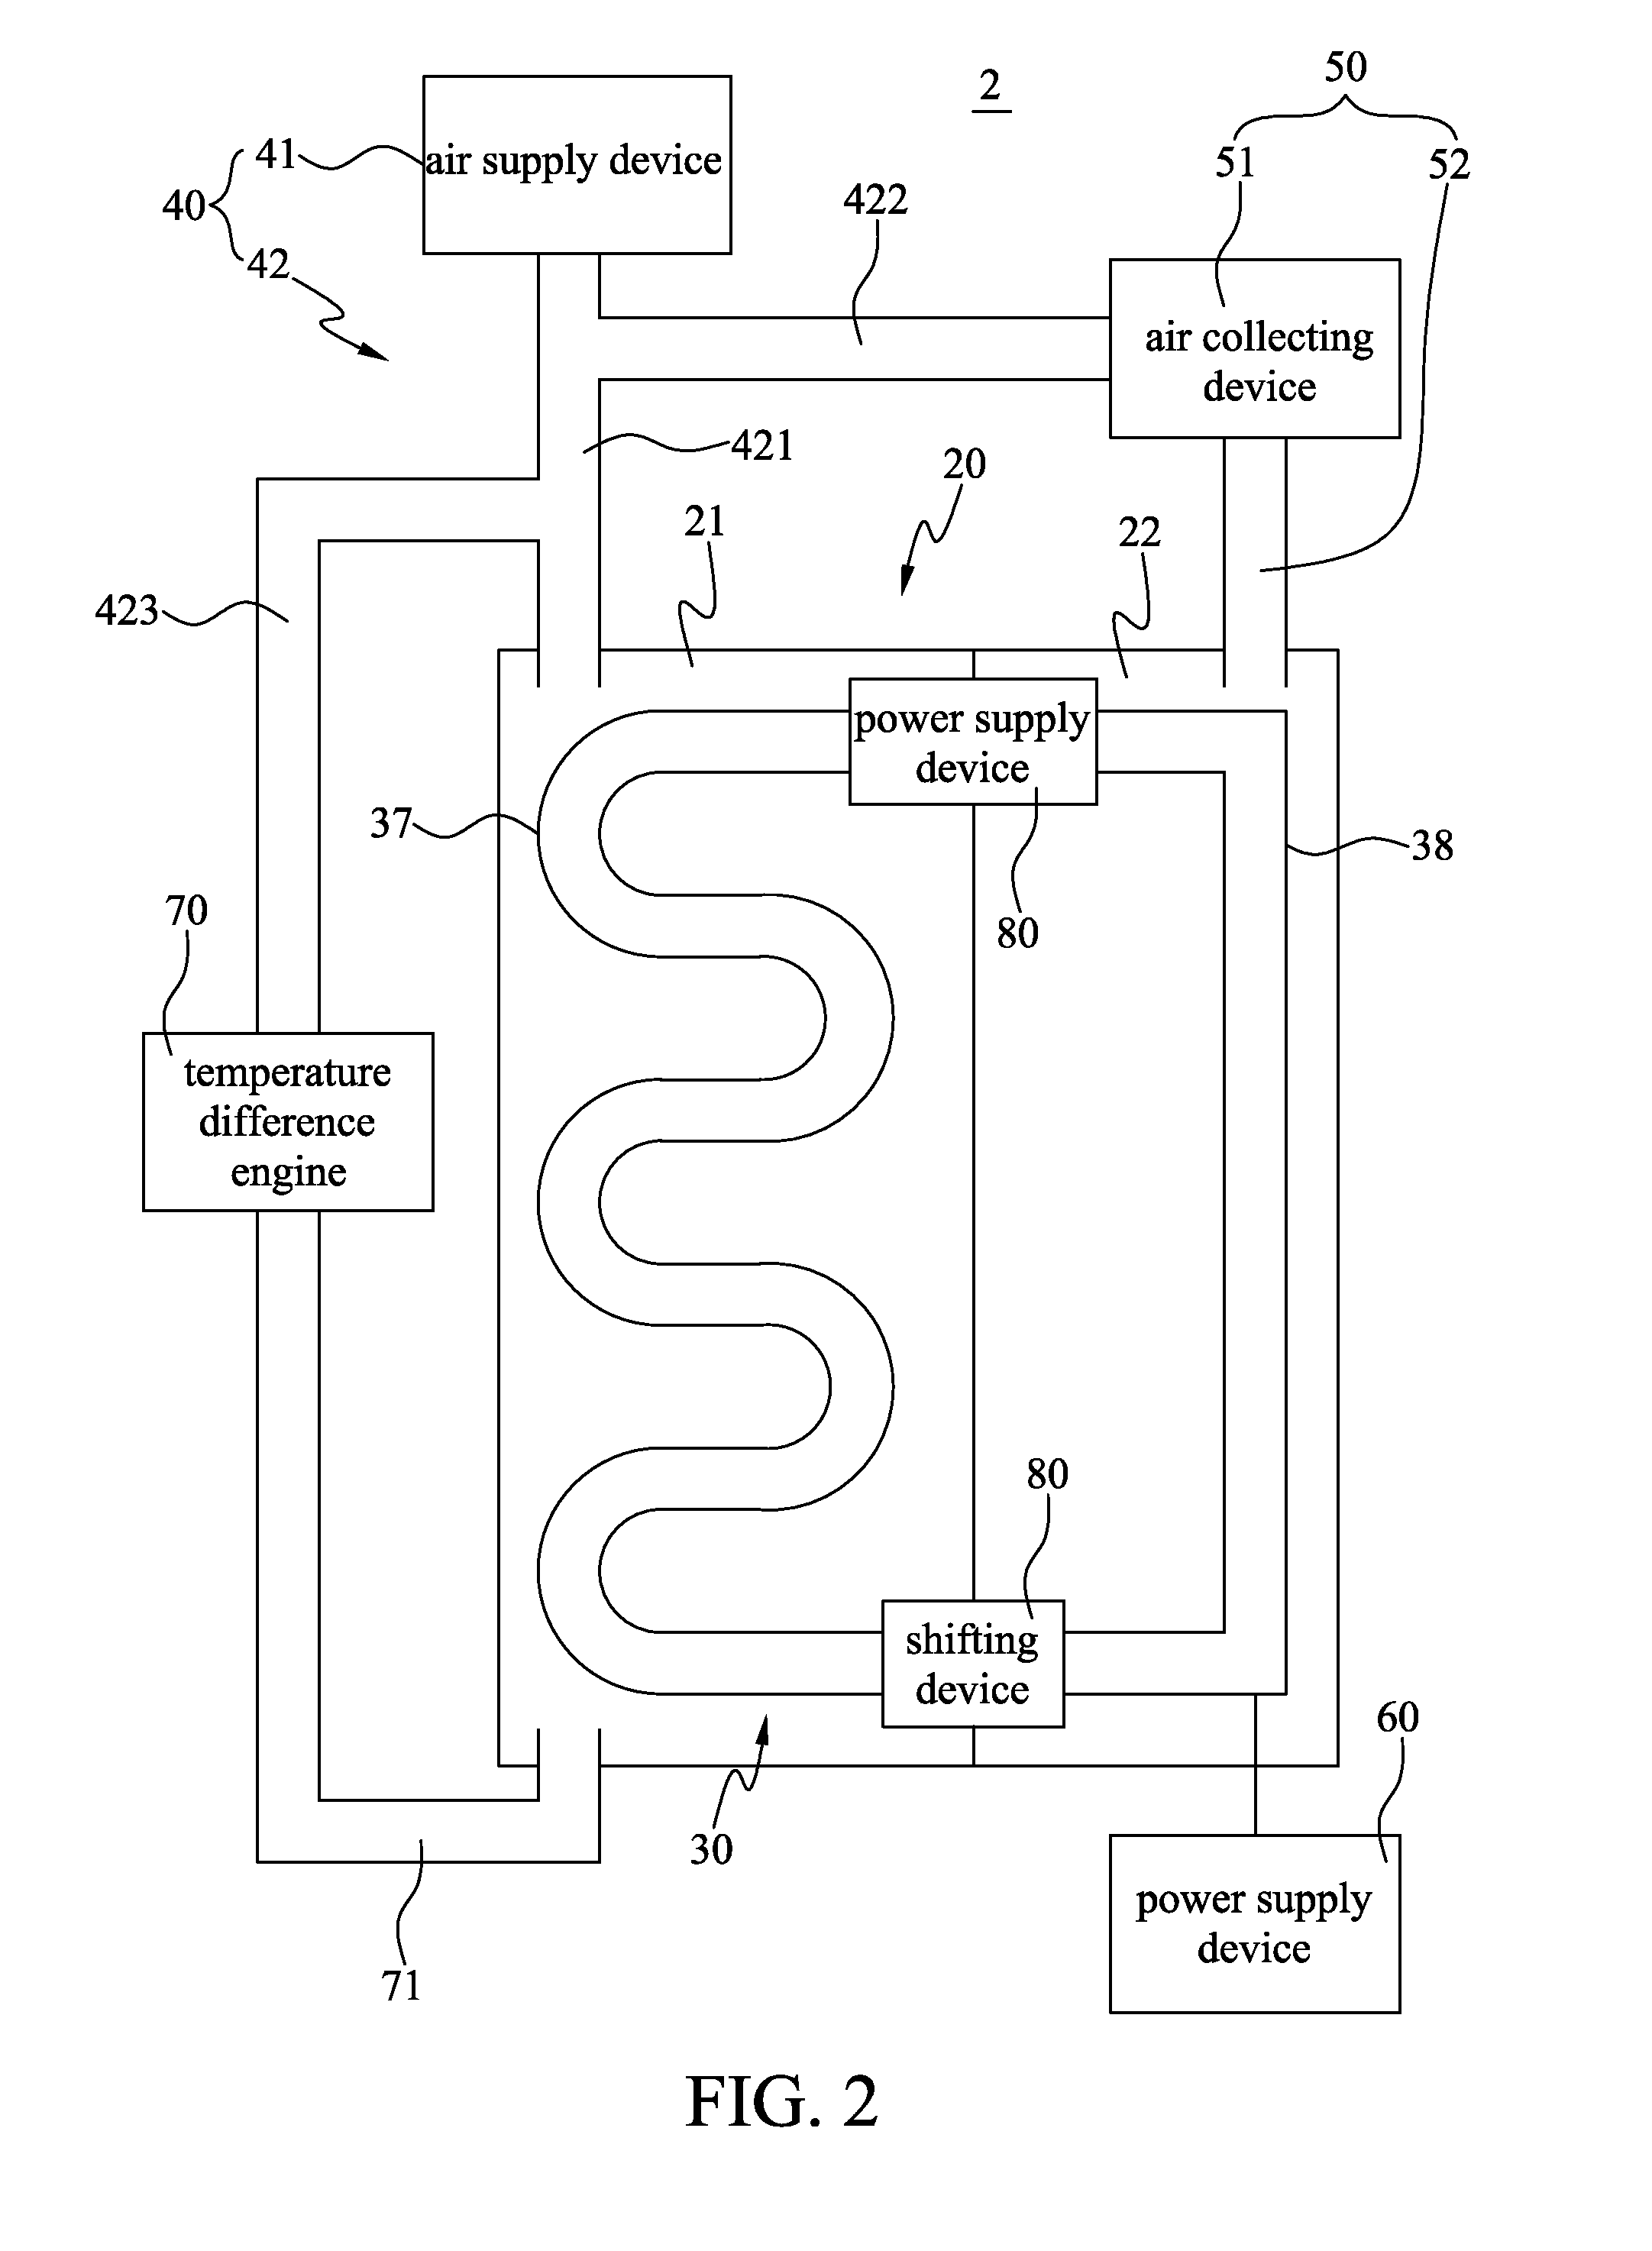 Intake circulatory system for zinc air fuel cell